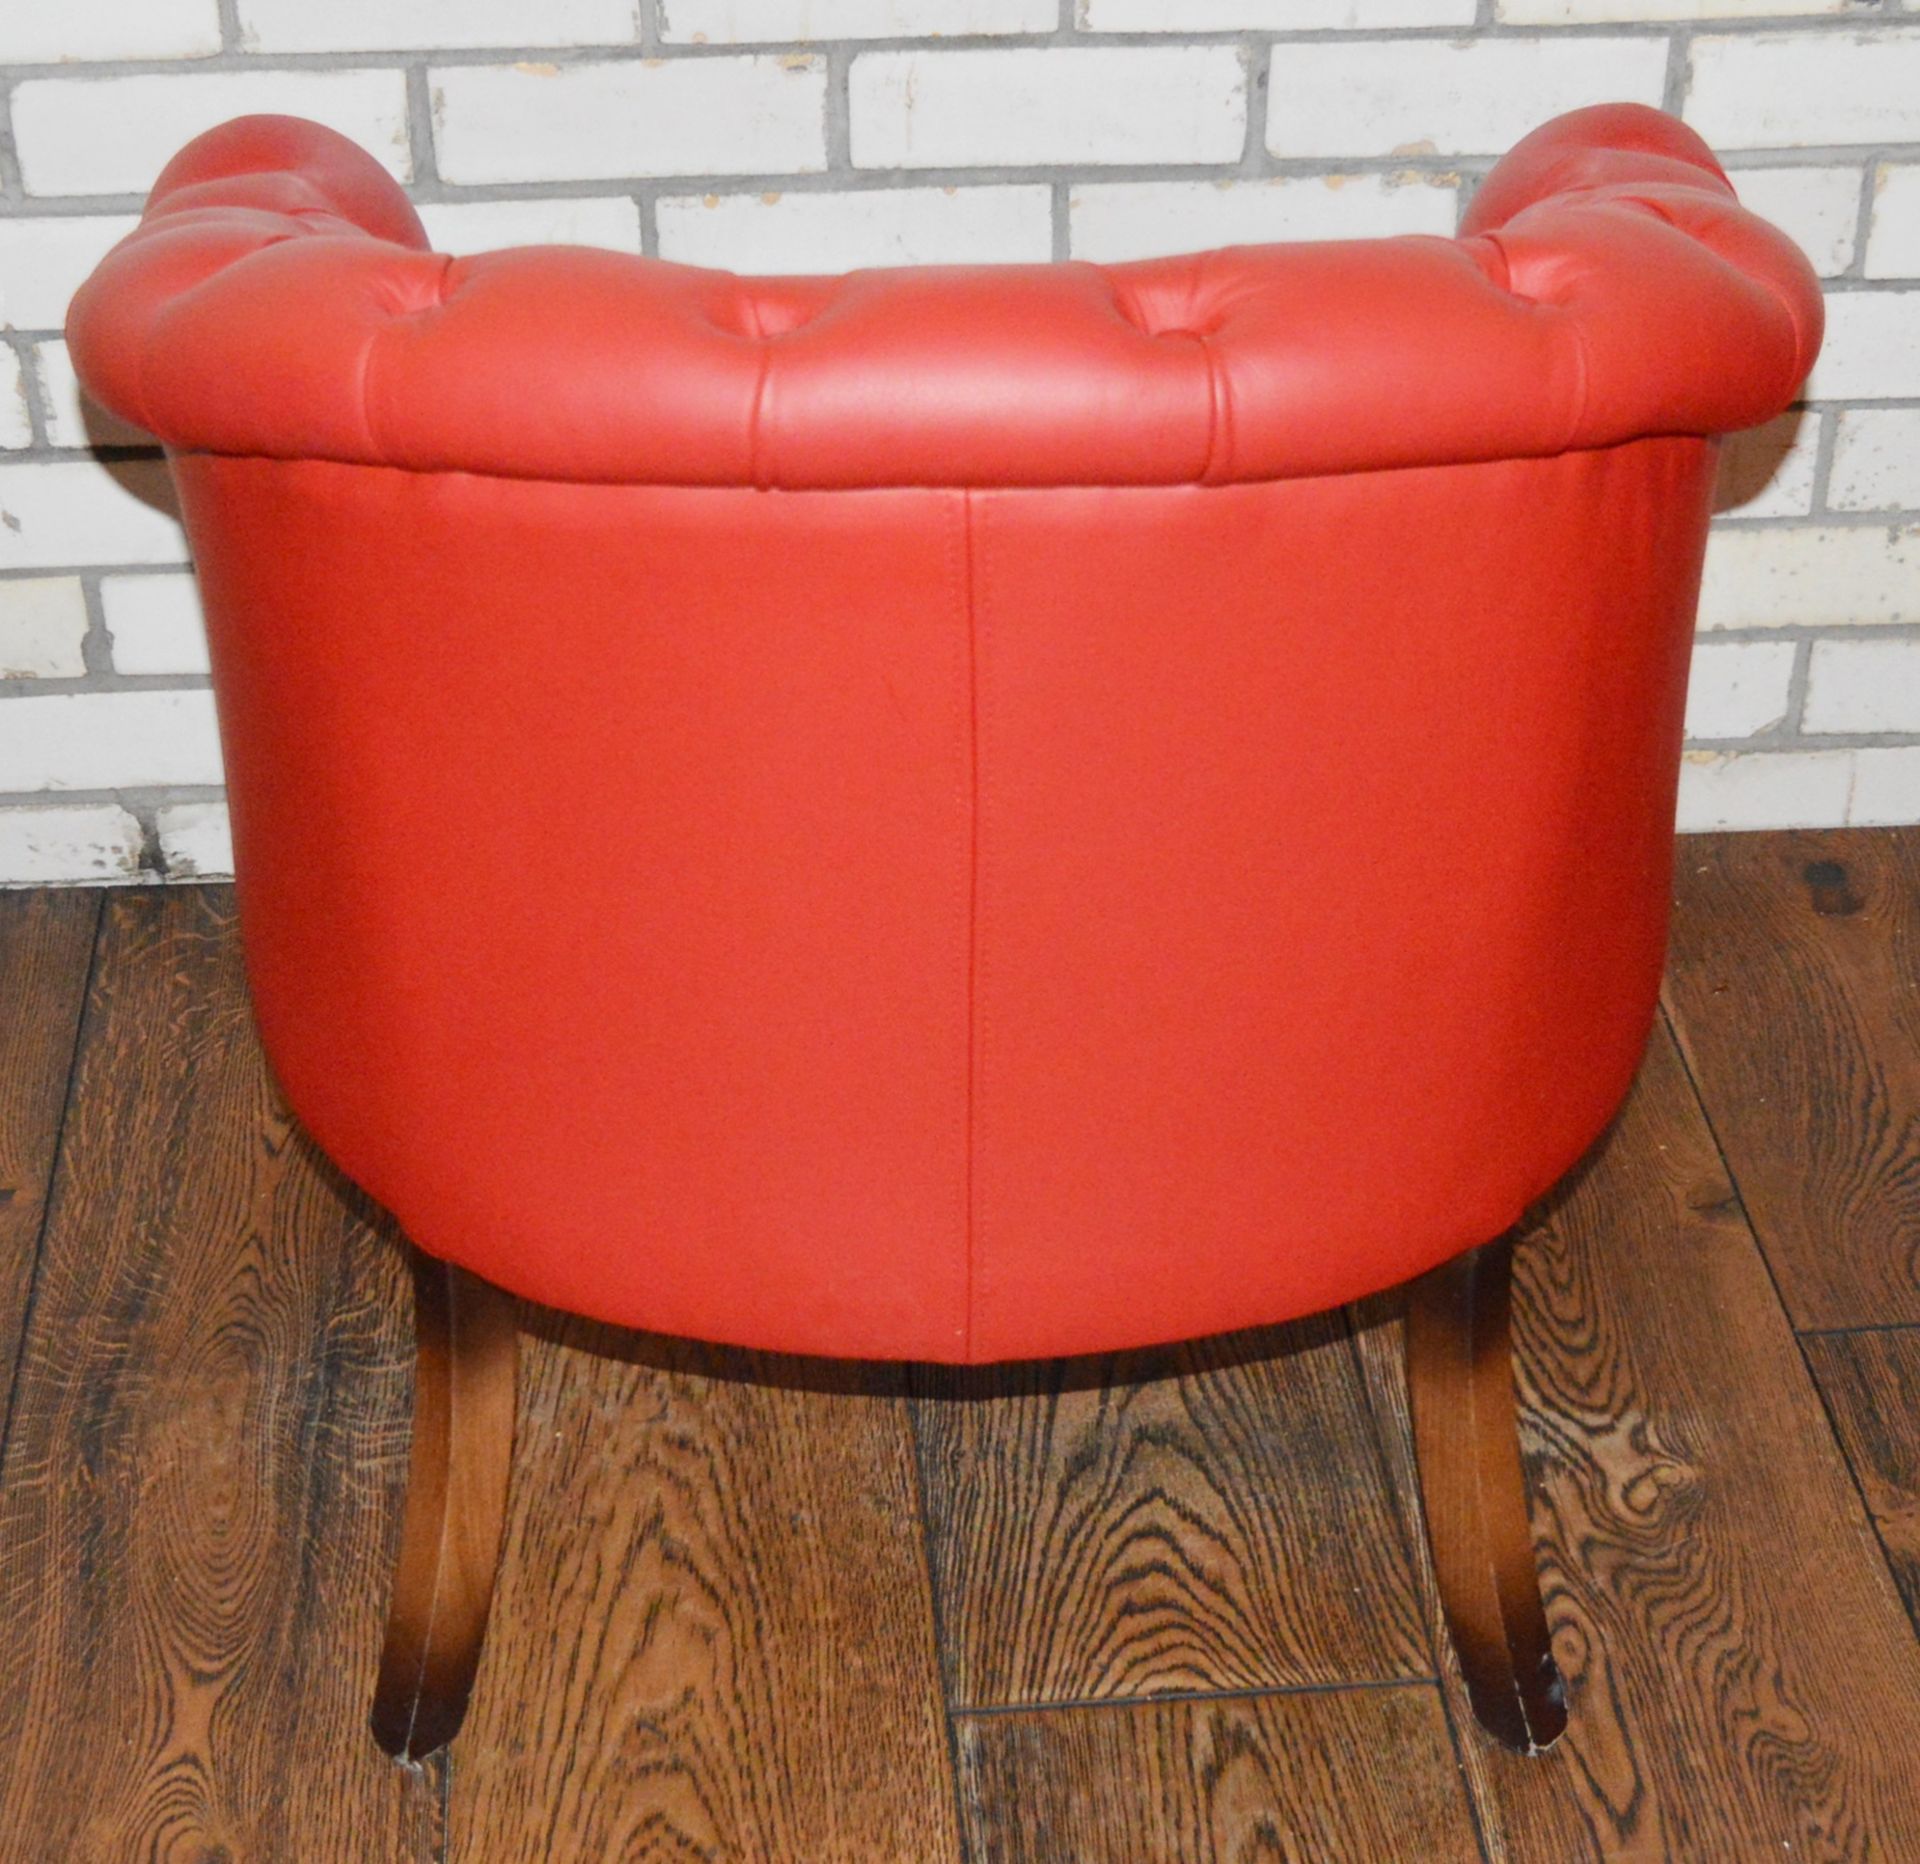 1 x Chesterfield Style Buttoned Back Red Leather Tub Chair With Hardwood Legs Finished in an - Image 3 of 8